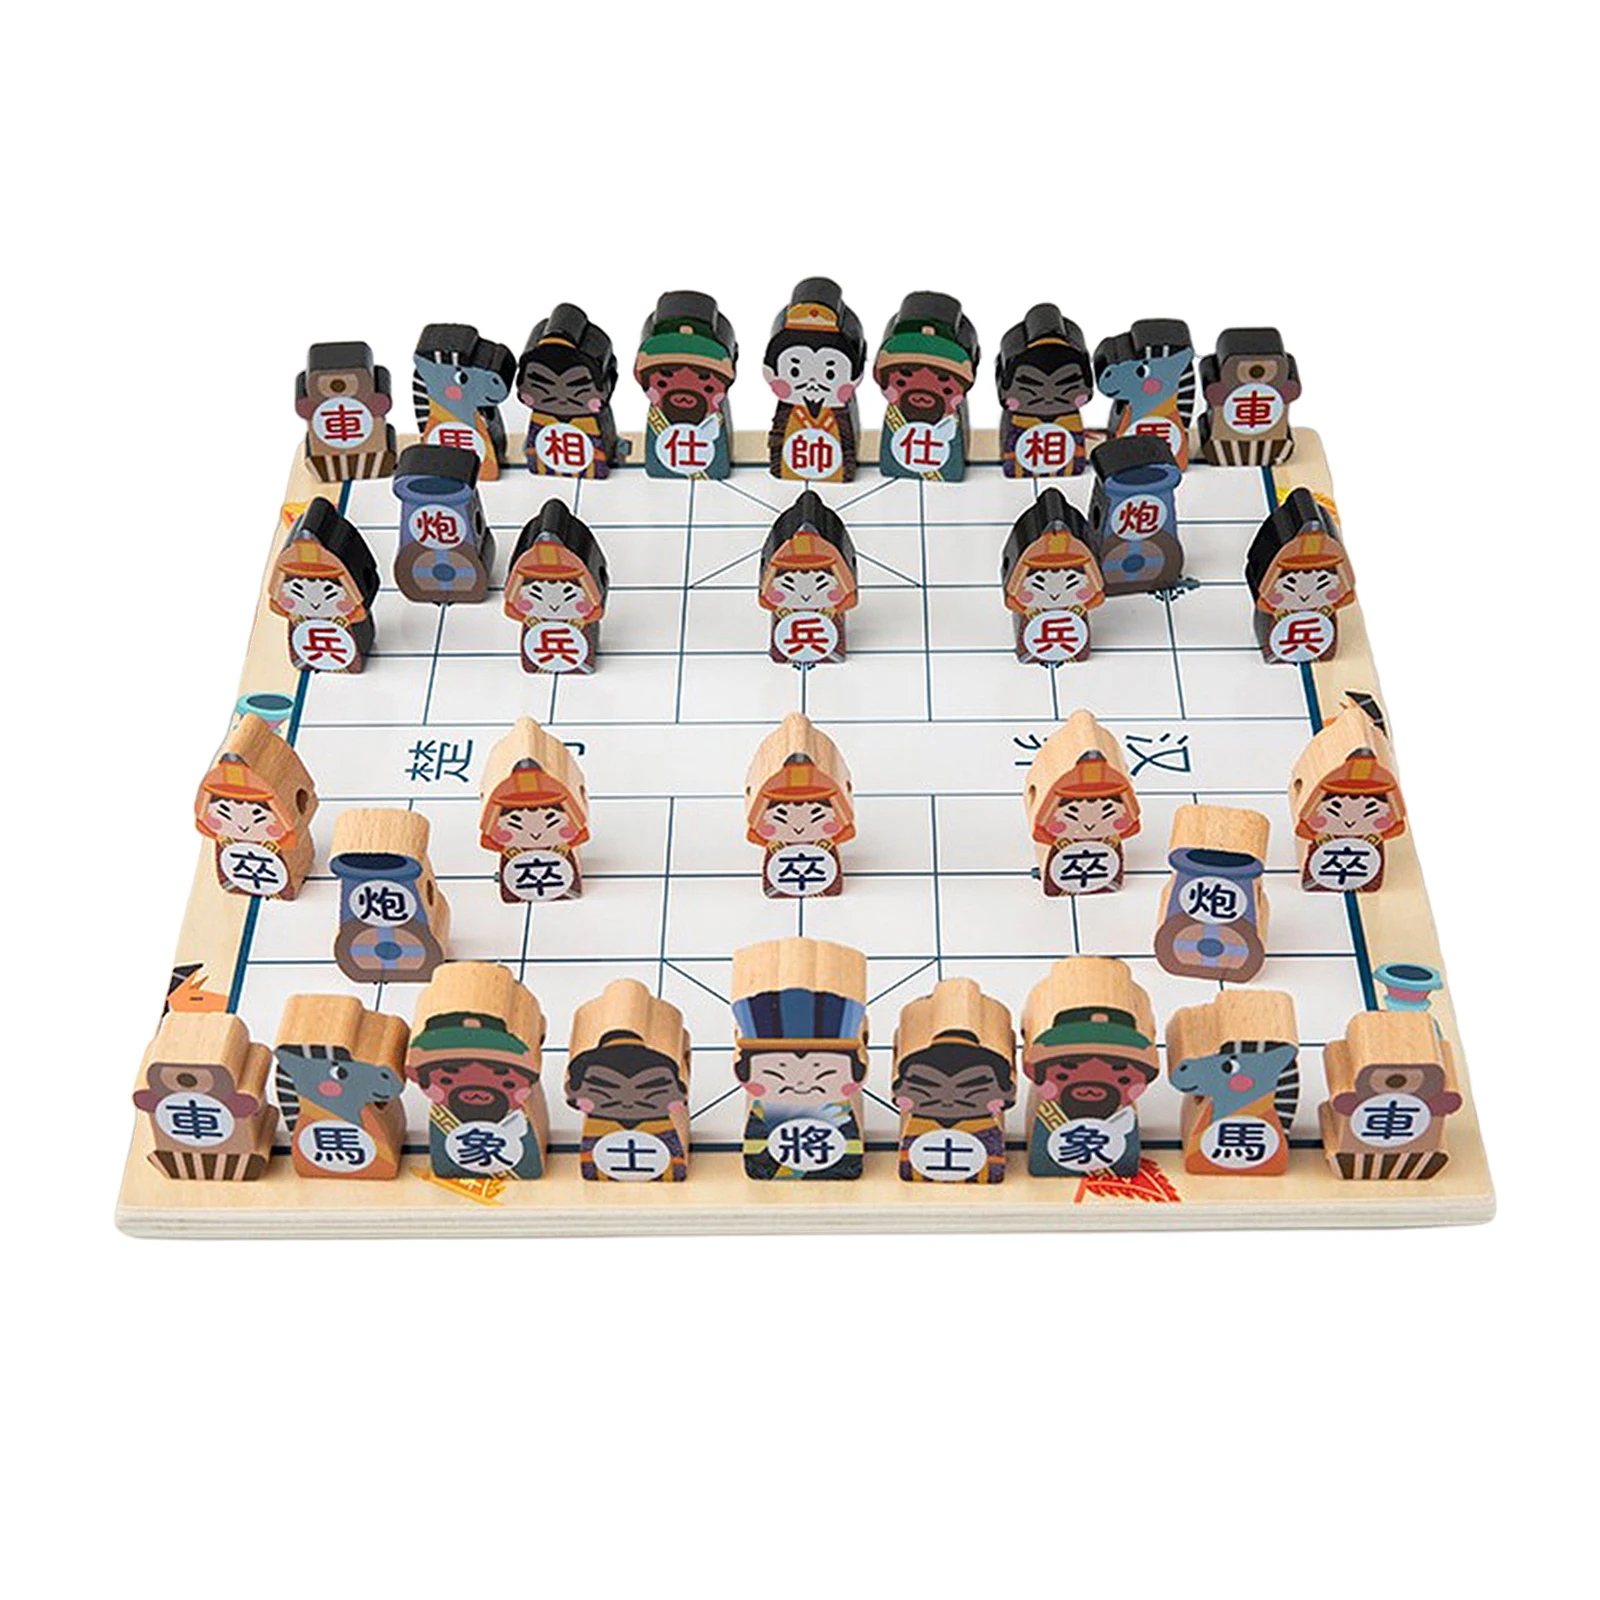 Wooden Vintage Chess Game King Soldier Chessman Chessboard Set Table Top Board Game for Kids Family Toy 30x30